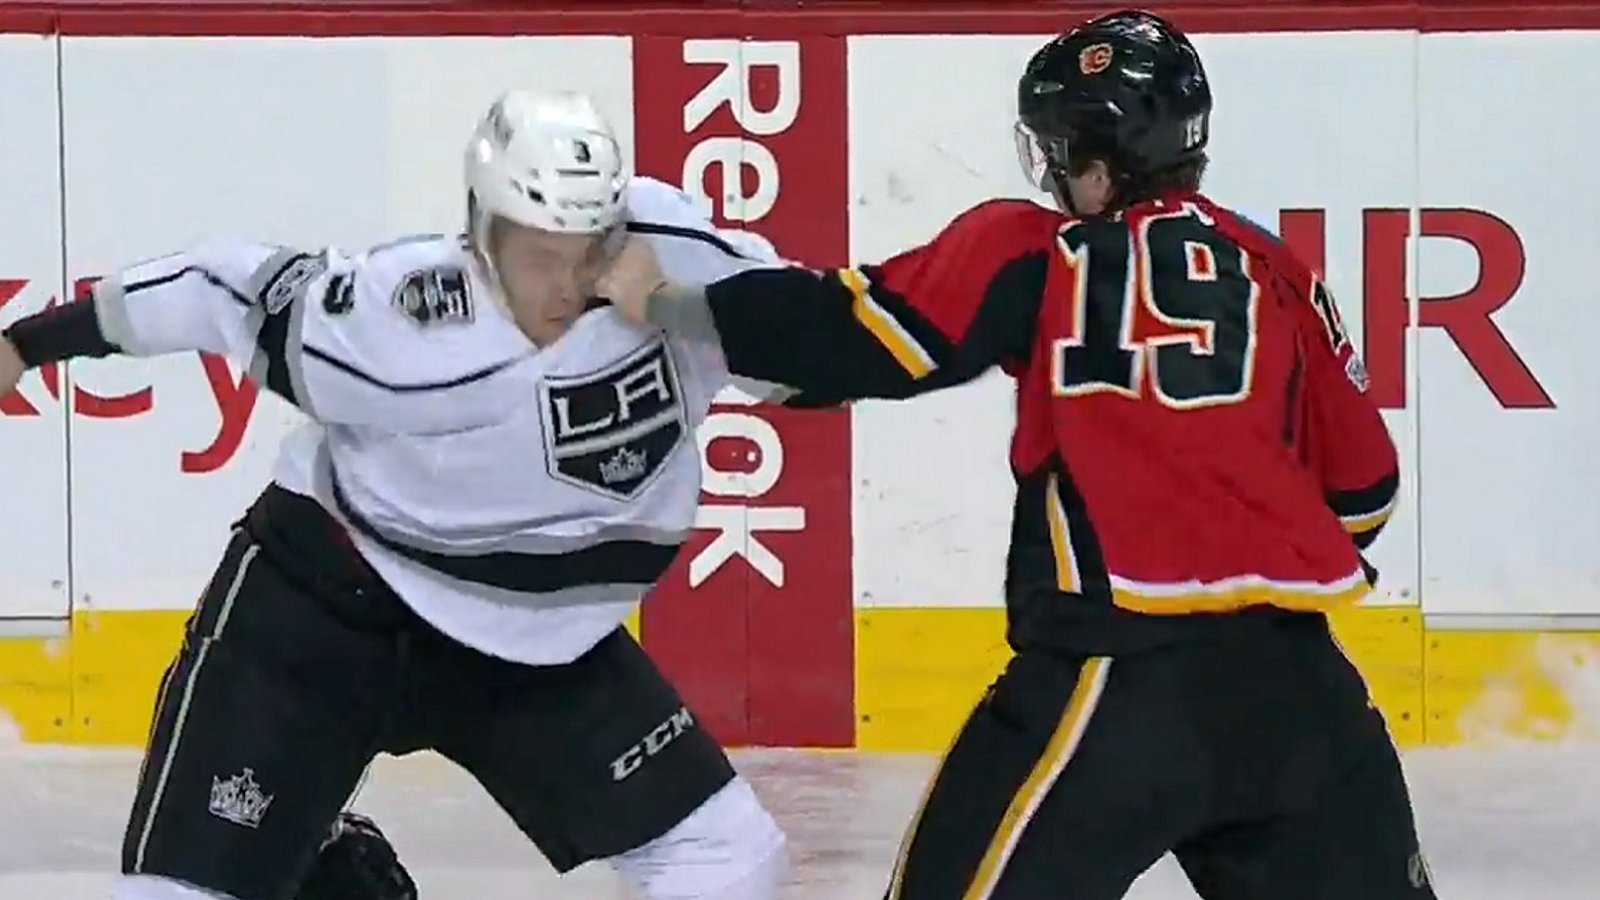 Kings challenge Tkachuk after elbow to Doughty and he answers the call.